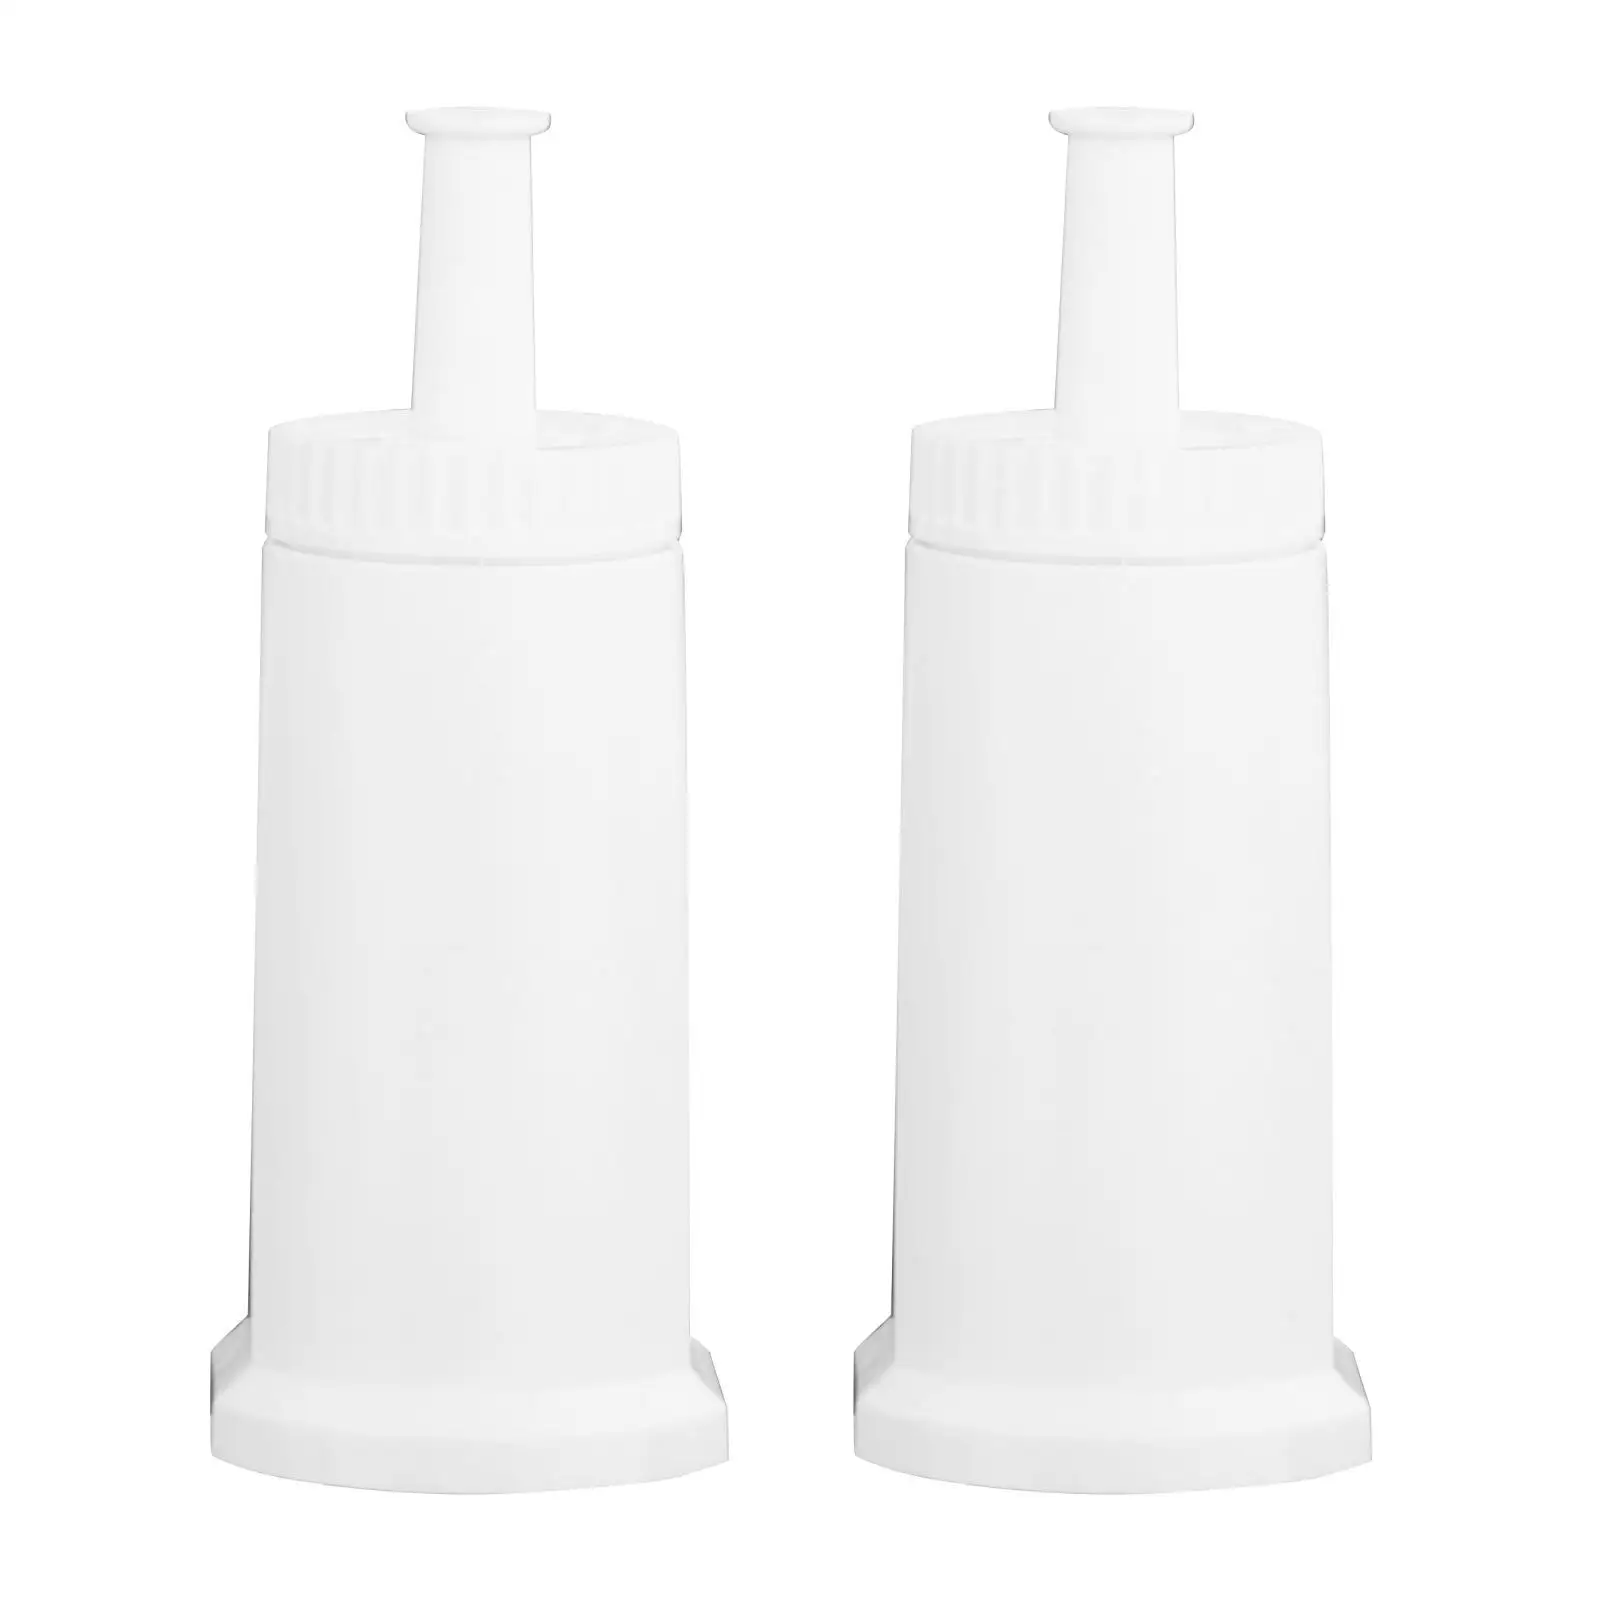 2Pcs Water Filter Replacement, Coffee Machine Cartridge Filter for   